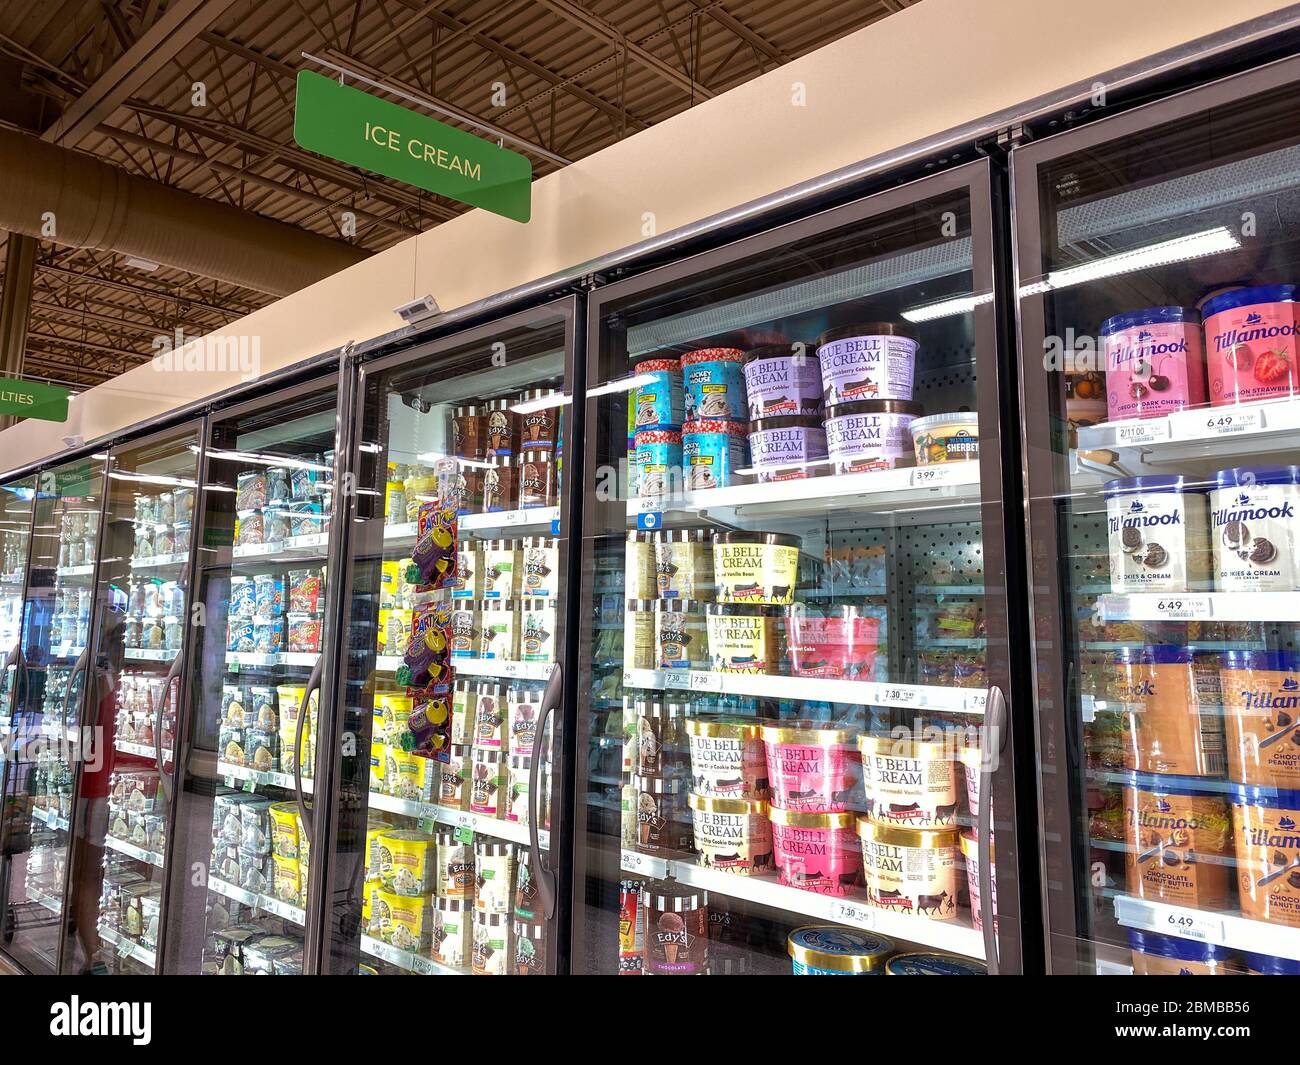 Orlando,FL/USA -5/4/20:  The Ice Cream section of the frozen foods aisle of a Publix grocery store where all sorts of tasty baked goods are displayed. Stock Photo